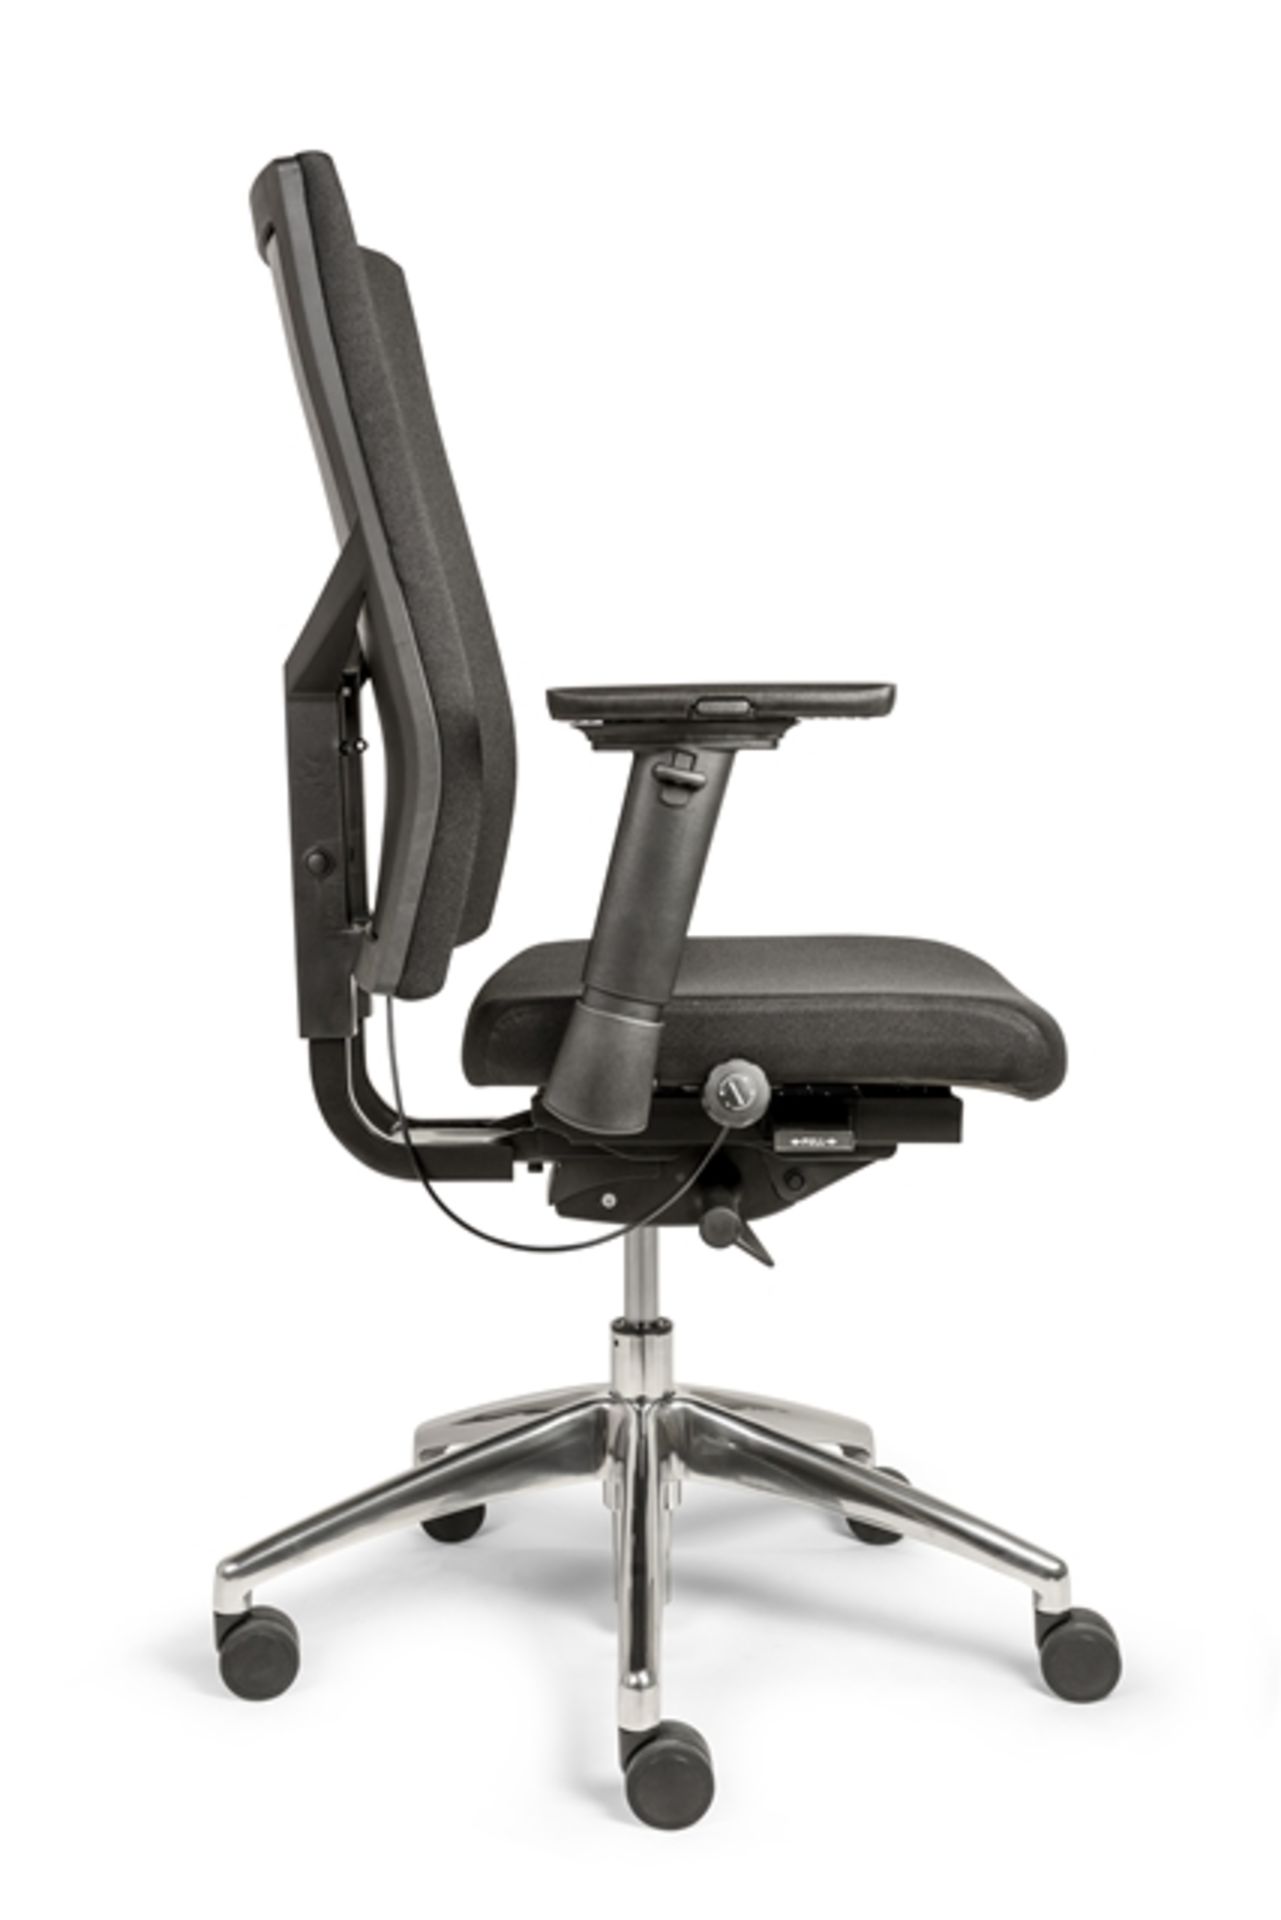 Unused ergonomic fully upholstered office chair in black (RRP £289) located in Stafford, viewing - Image 4 of 7